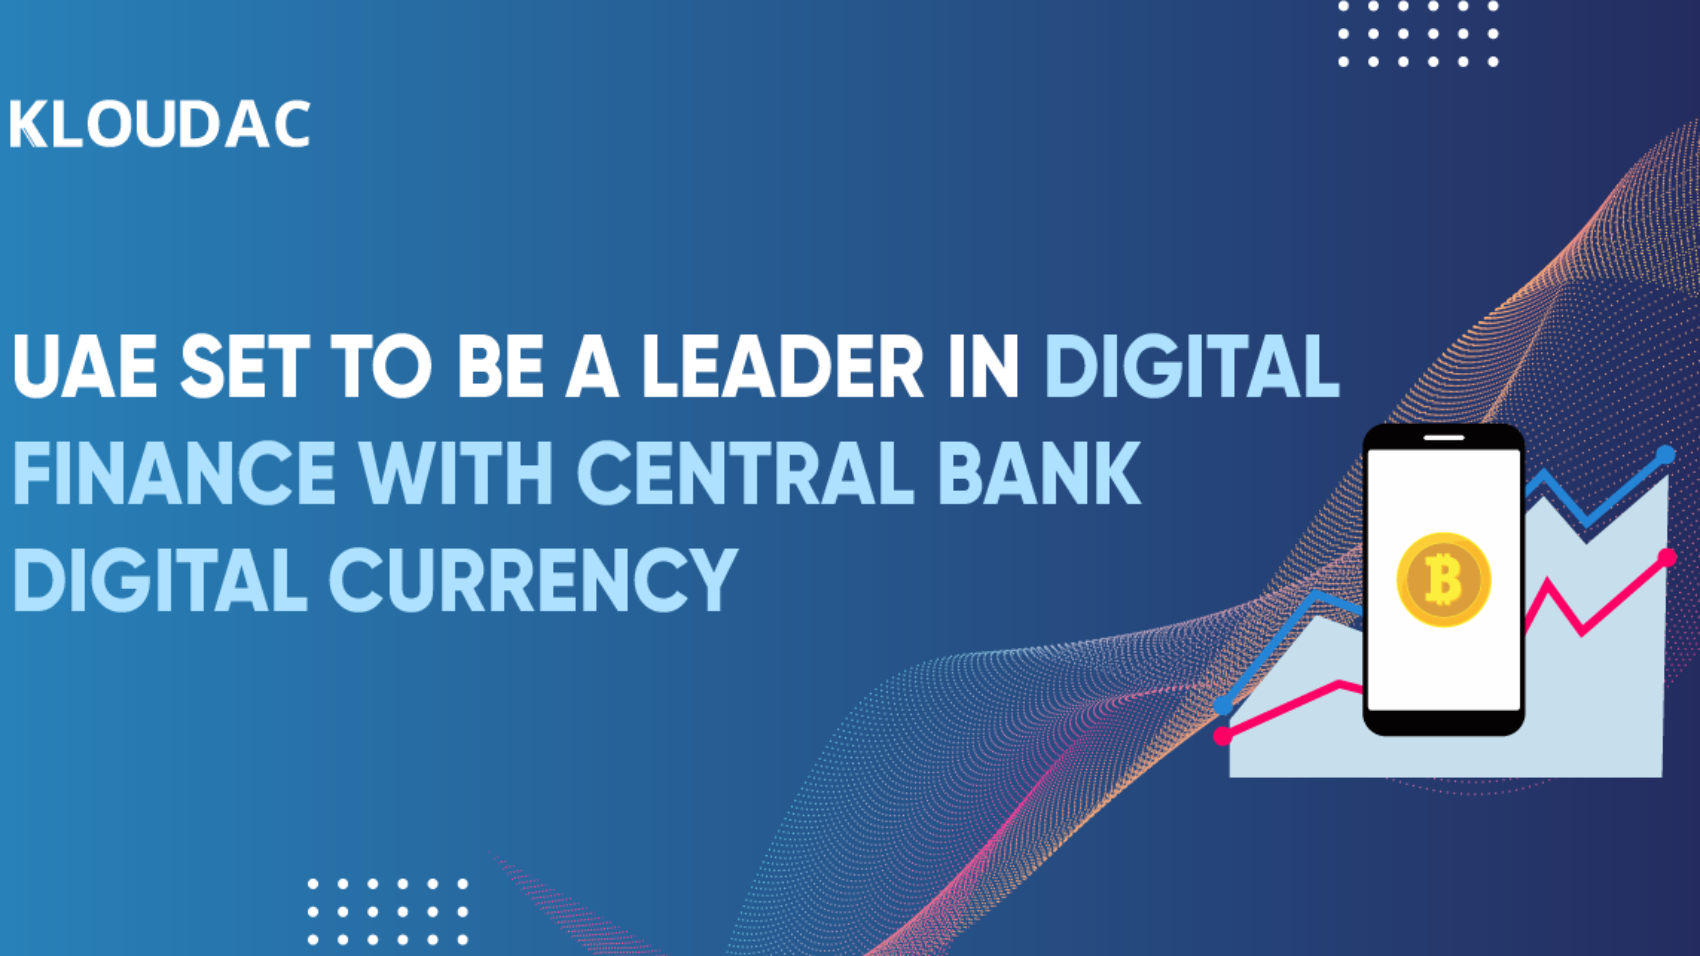 UAE set to be a leader in digital finance with Central Bank Digital Currency